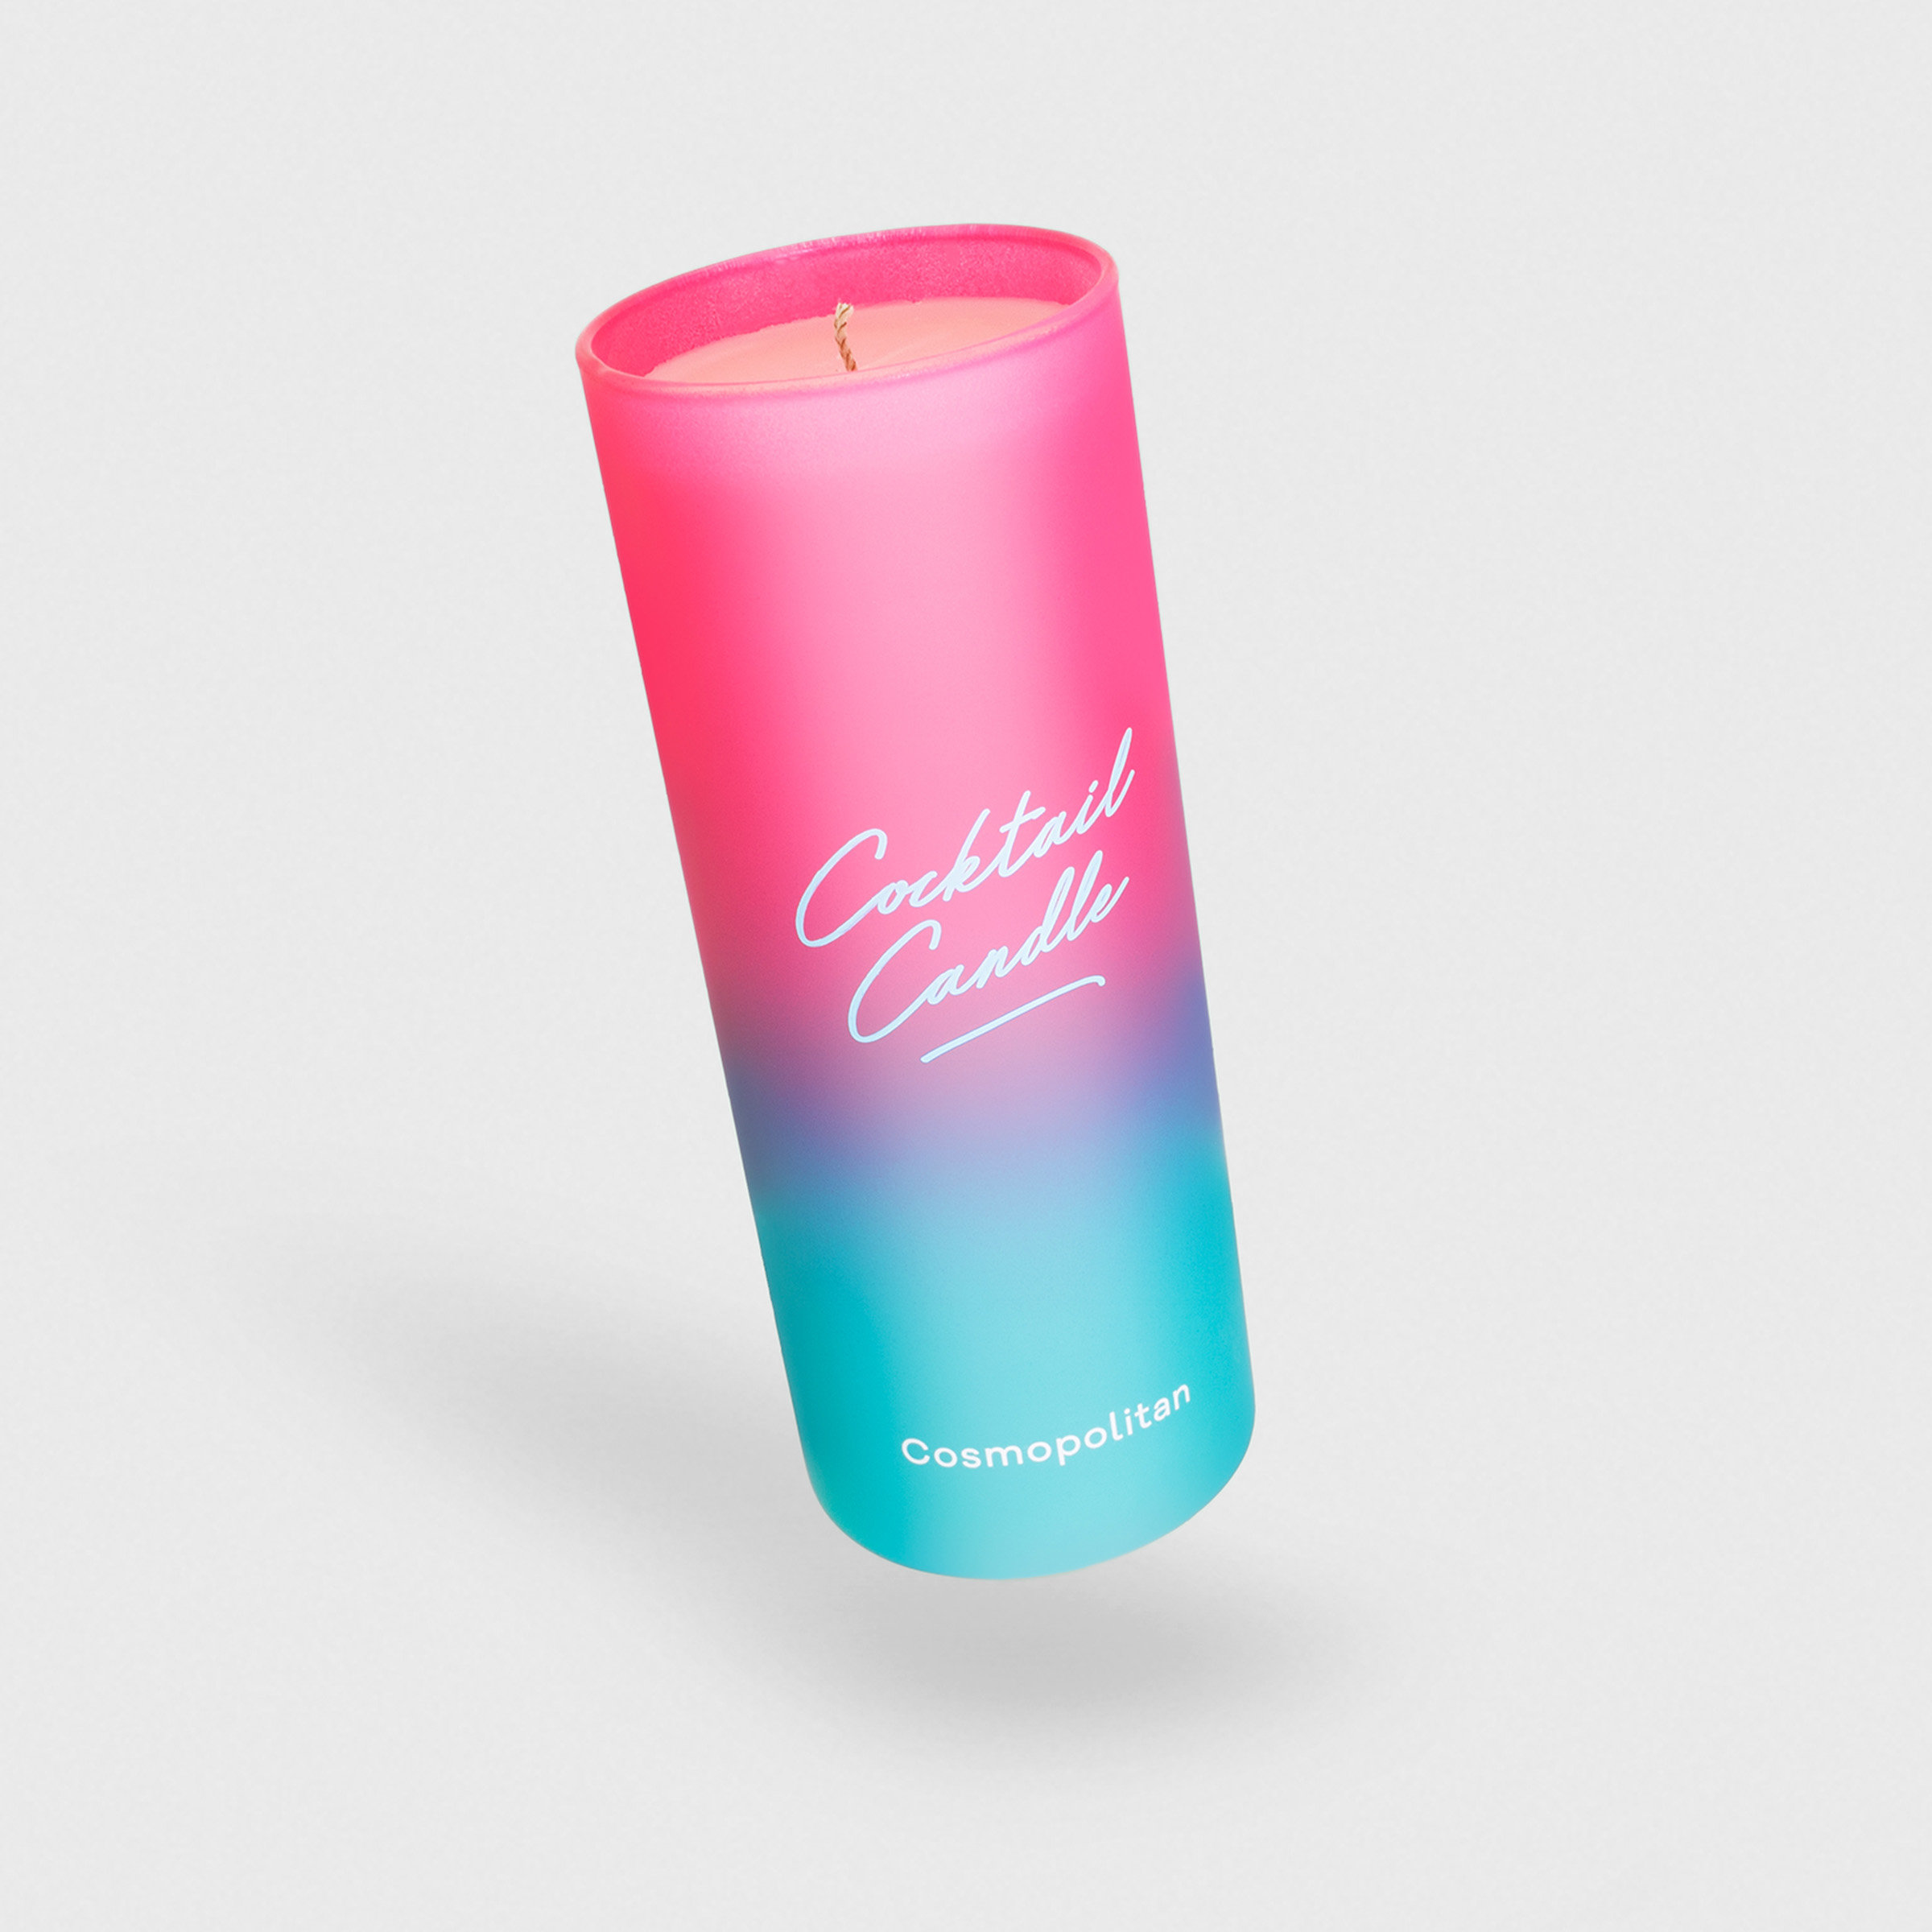 Cosmopolitan scented candle